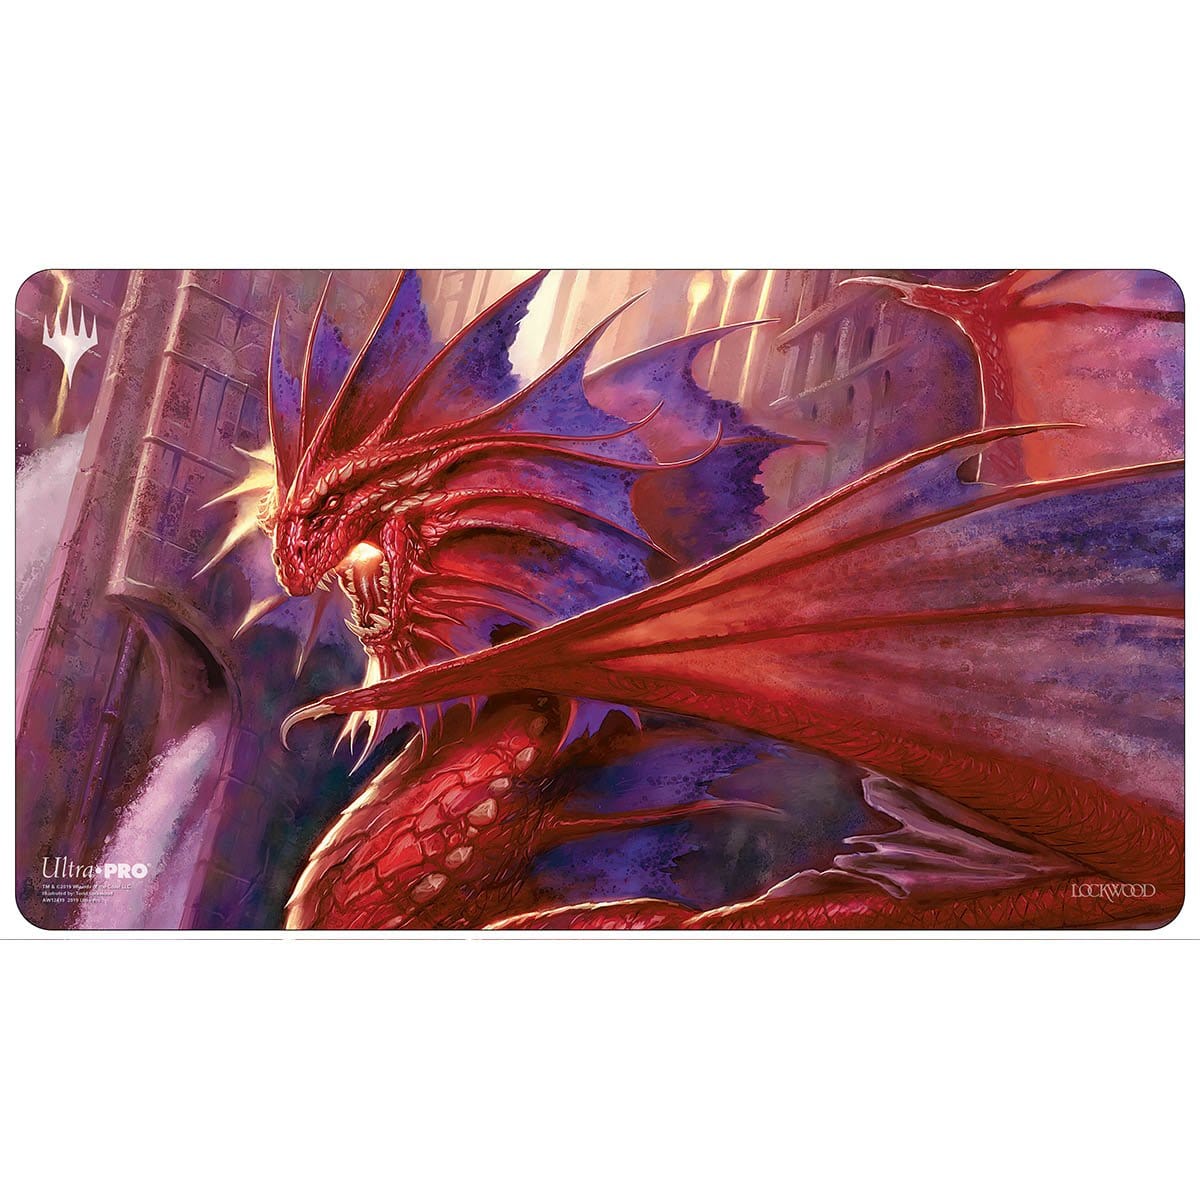 Niv-Mizzet, the Firemind Playmat - Playmat - Original Magic Art - Accessories for Magic the Gathering and other card games